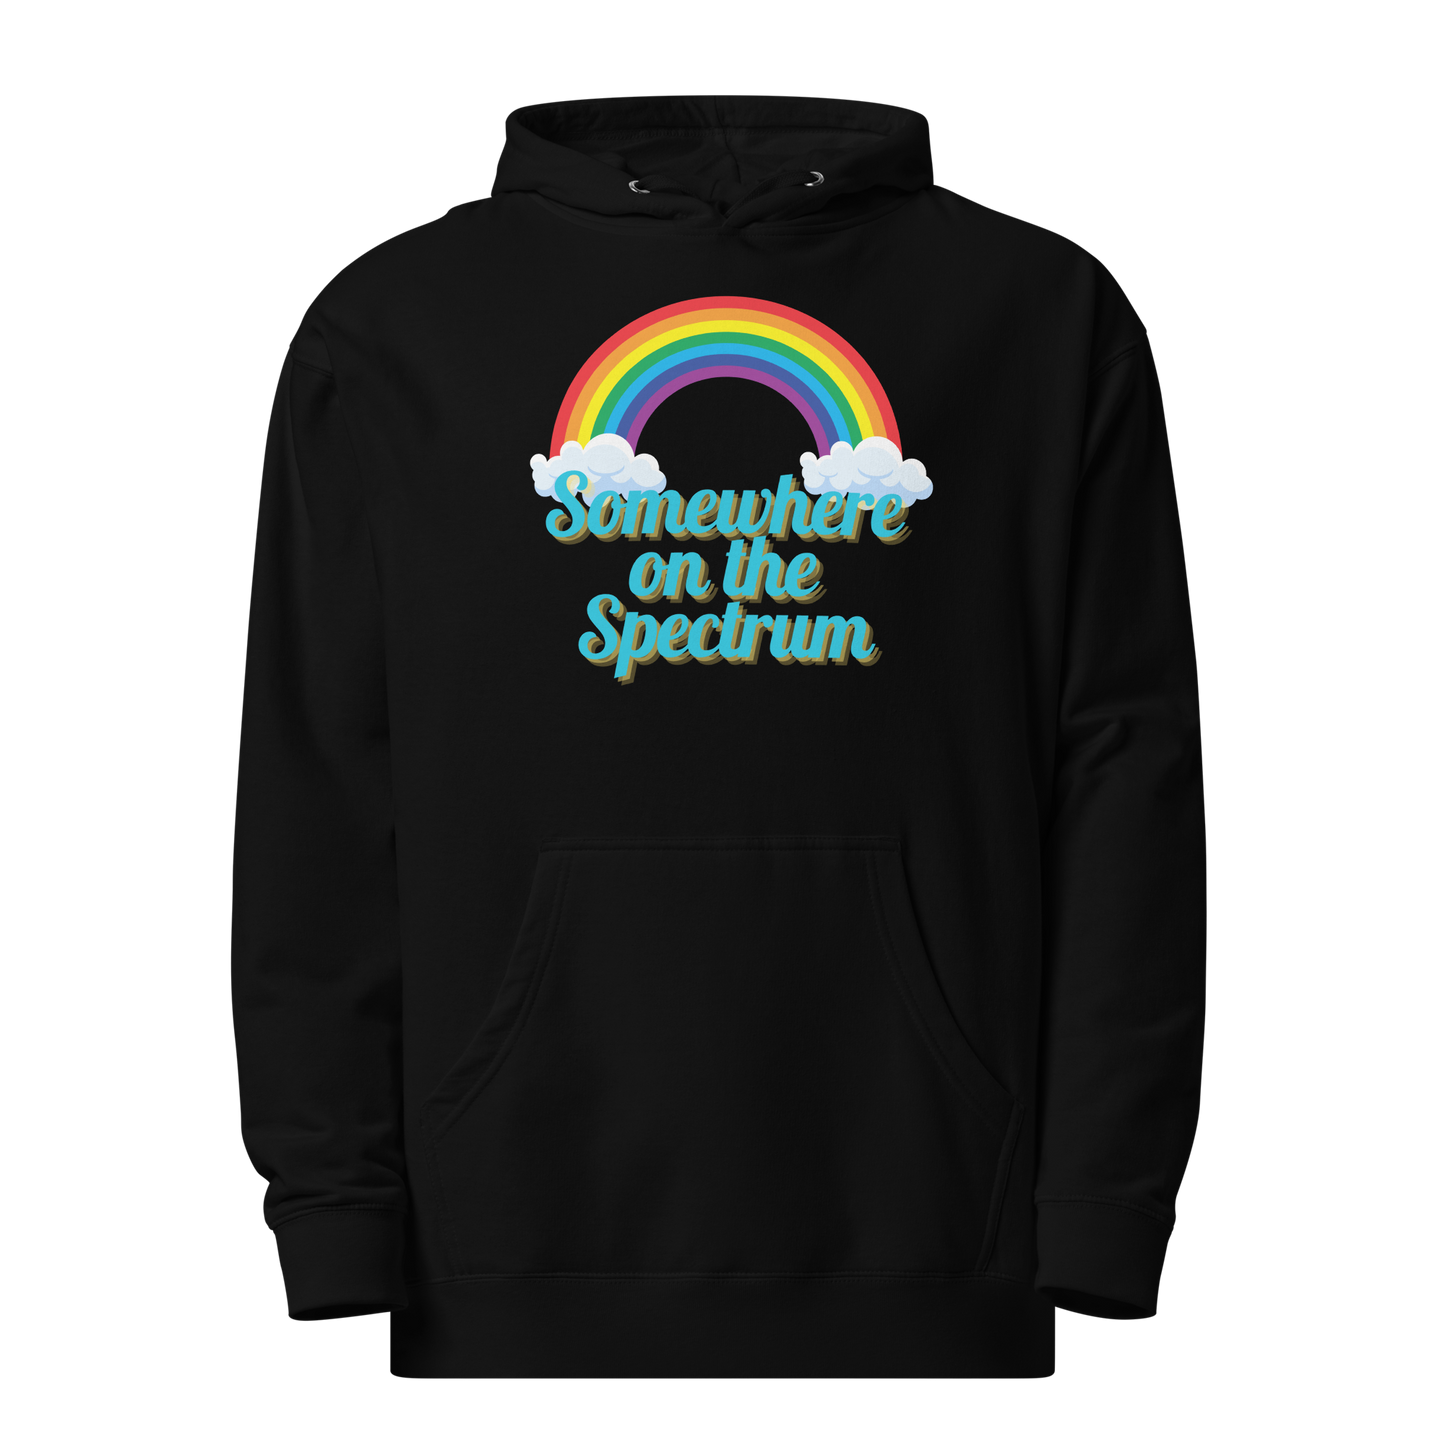 Somewhere on the Spectrum Unisex Midweight Hoodie